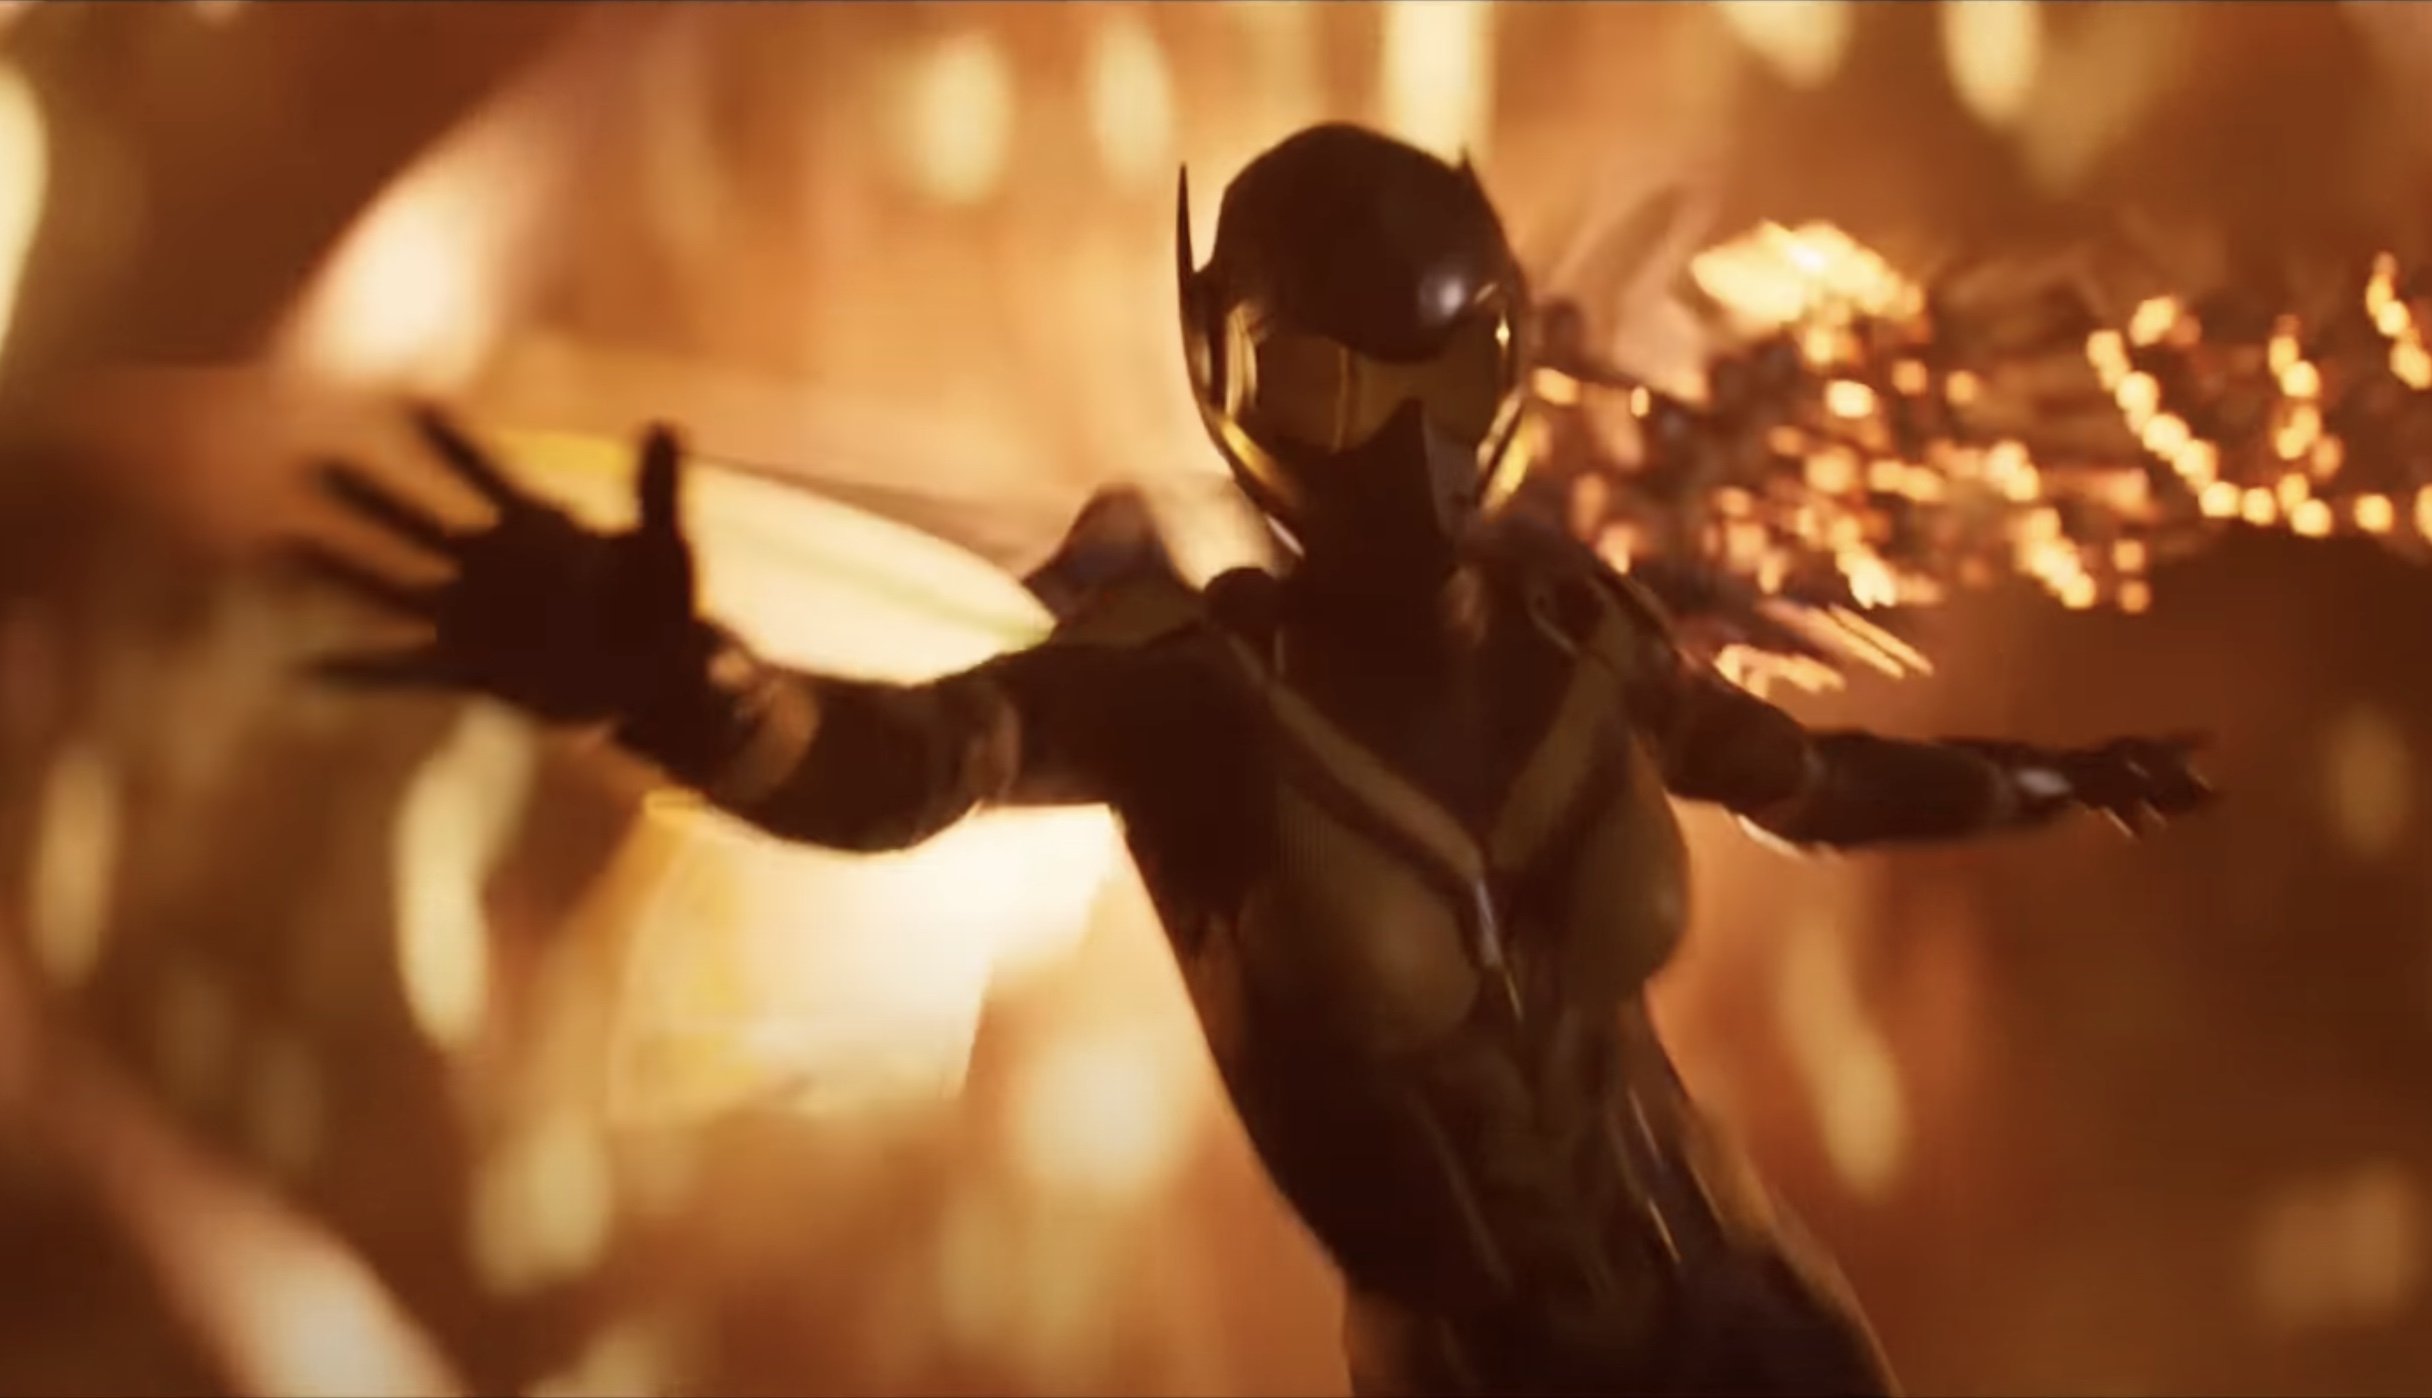 Ant-Man and The Wasp: Quantumania: Extended Preview - Trailers & Videos - Rotten  Tomatoes